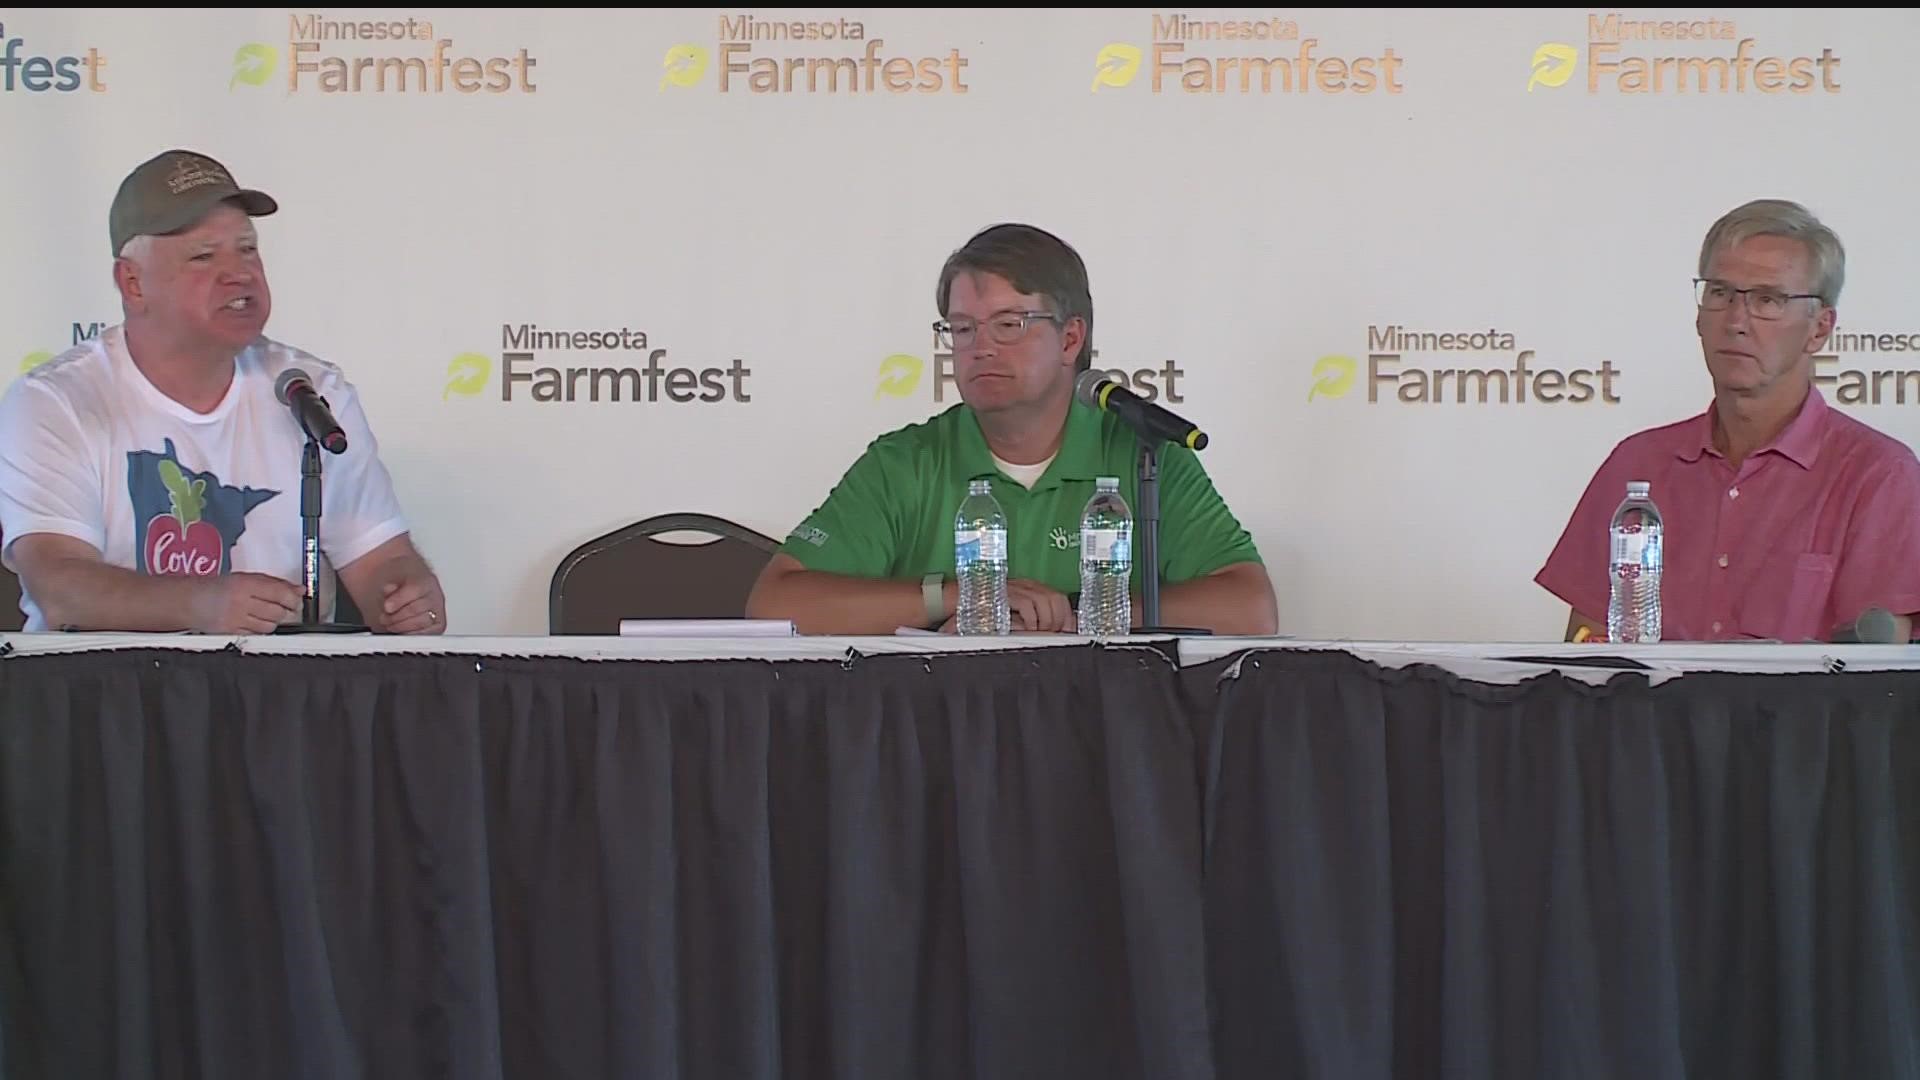 At Redwood County's Farmfest, Gov. Tim Walz and GOP challenger Scott Jensen sparred over policies and views in their first face-to-face showdown.